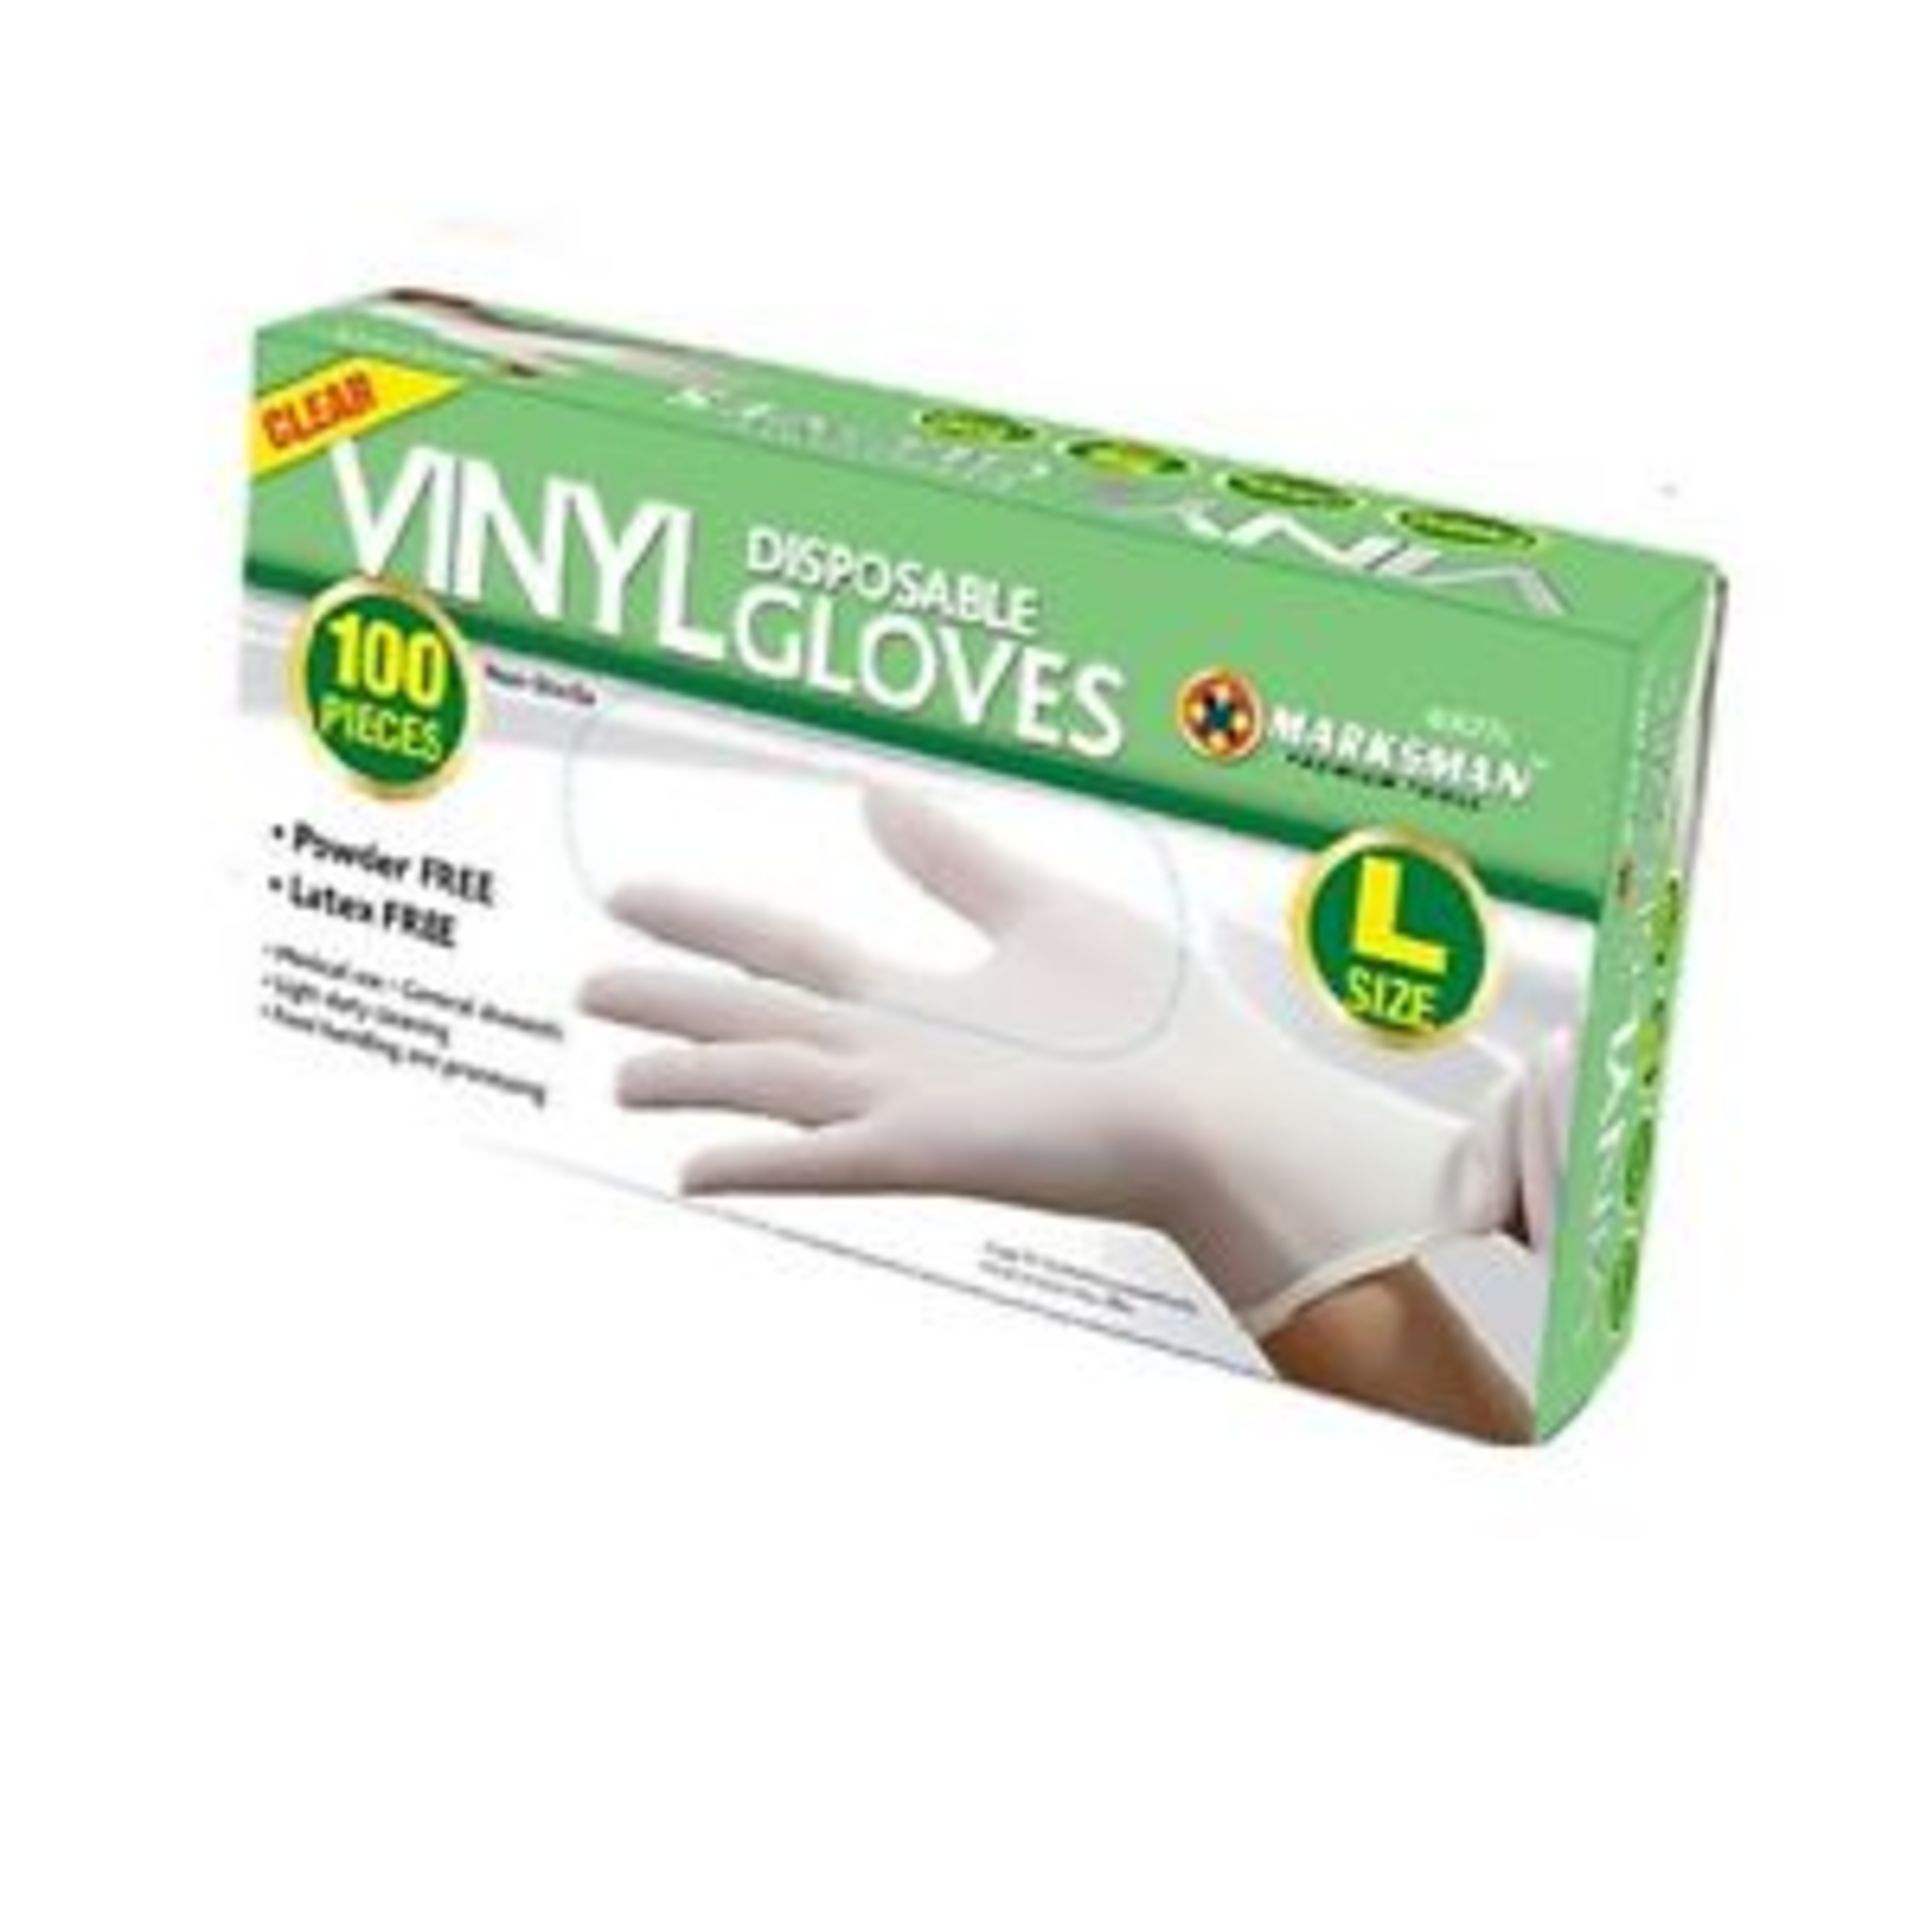 V *TRADE QTY* Brand New Box Of 100 Disposable Vinyl Gloves - Size Large X 4 YOUR BID PRICE TO BE